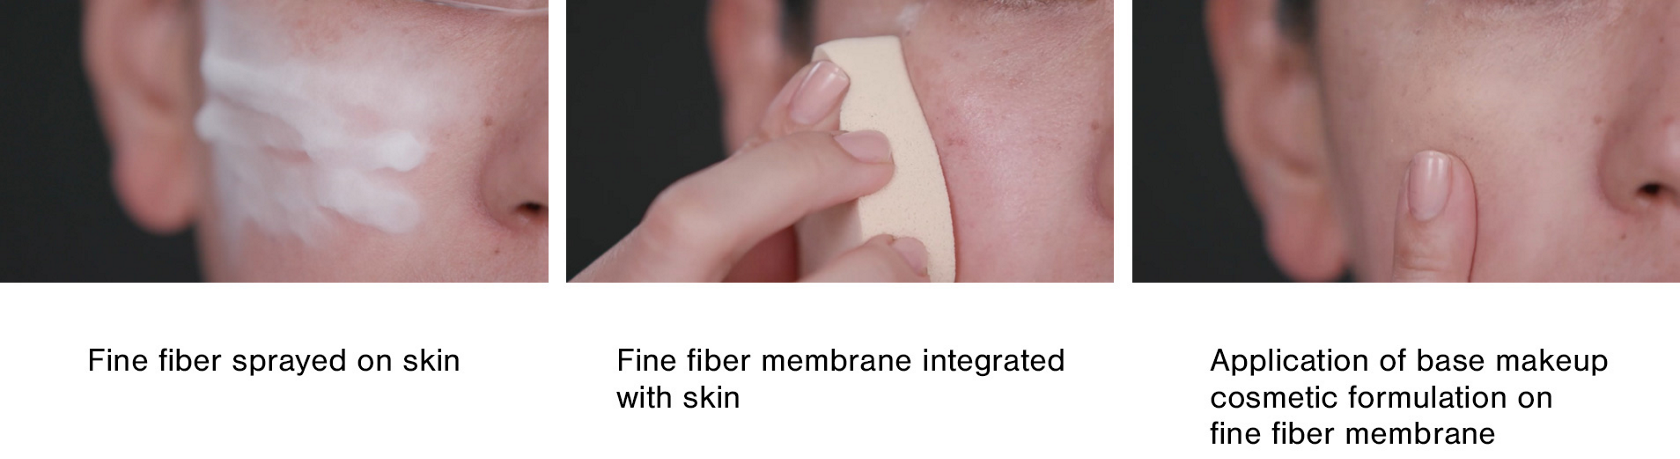 Kao  Fine Fiber Technology with Base Makeup: Base Makeup Applied to Fine  Fiber Membrane Results in Film that Smooths Skin Roughness and Gives High  Spot-covering Effect